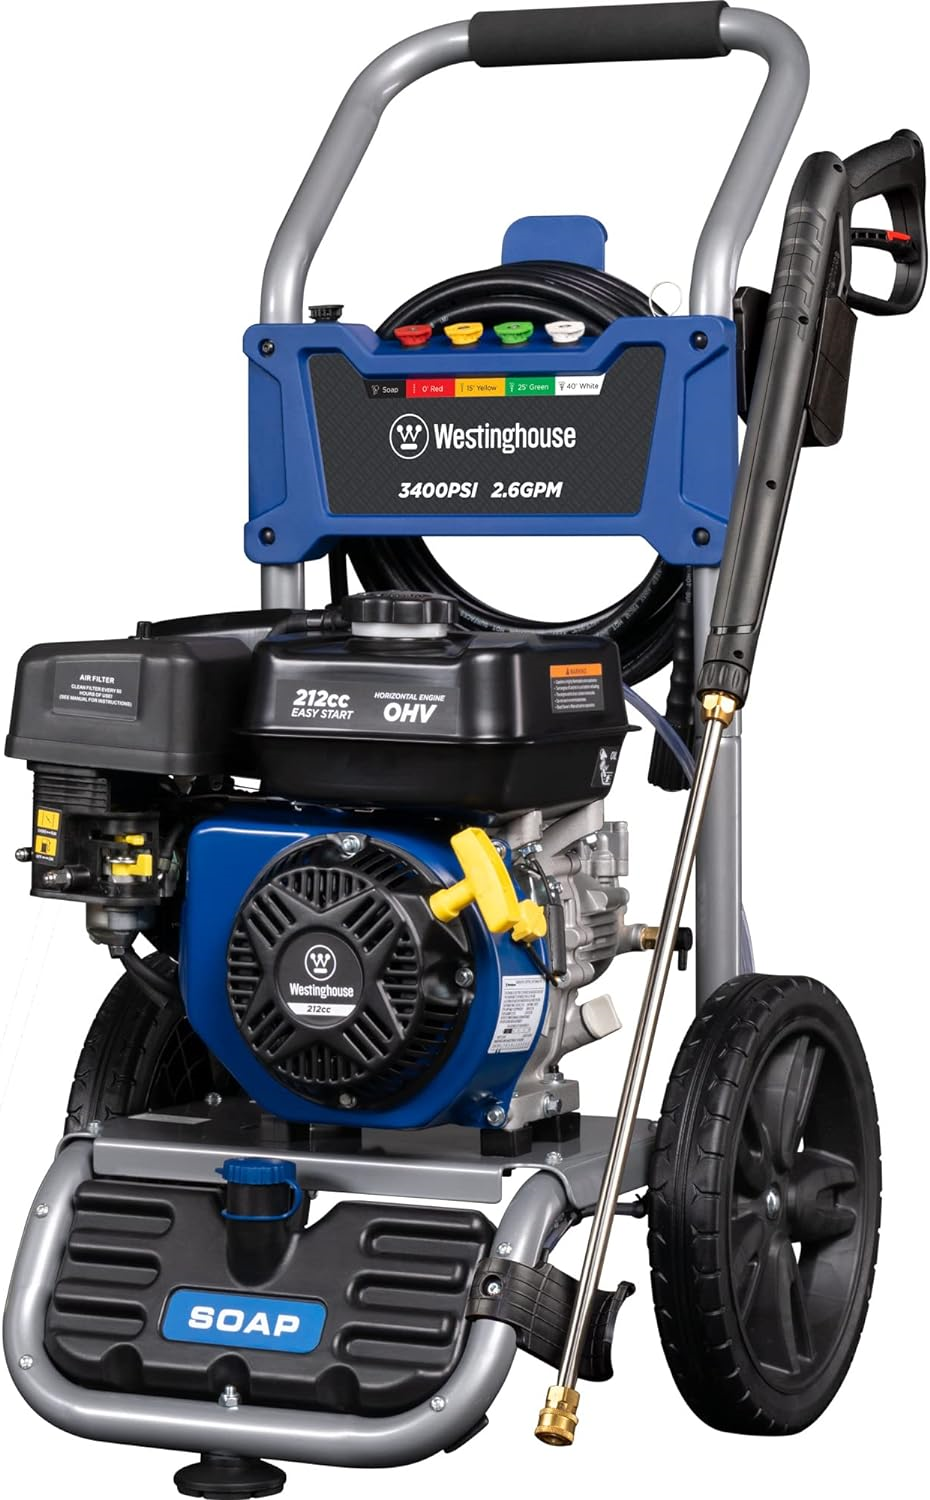 Westinghouse WPX3400 Pressure Washer 3400 PSI 2.6 GPM Gas New